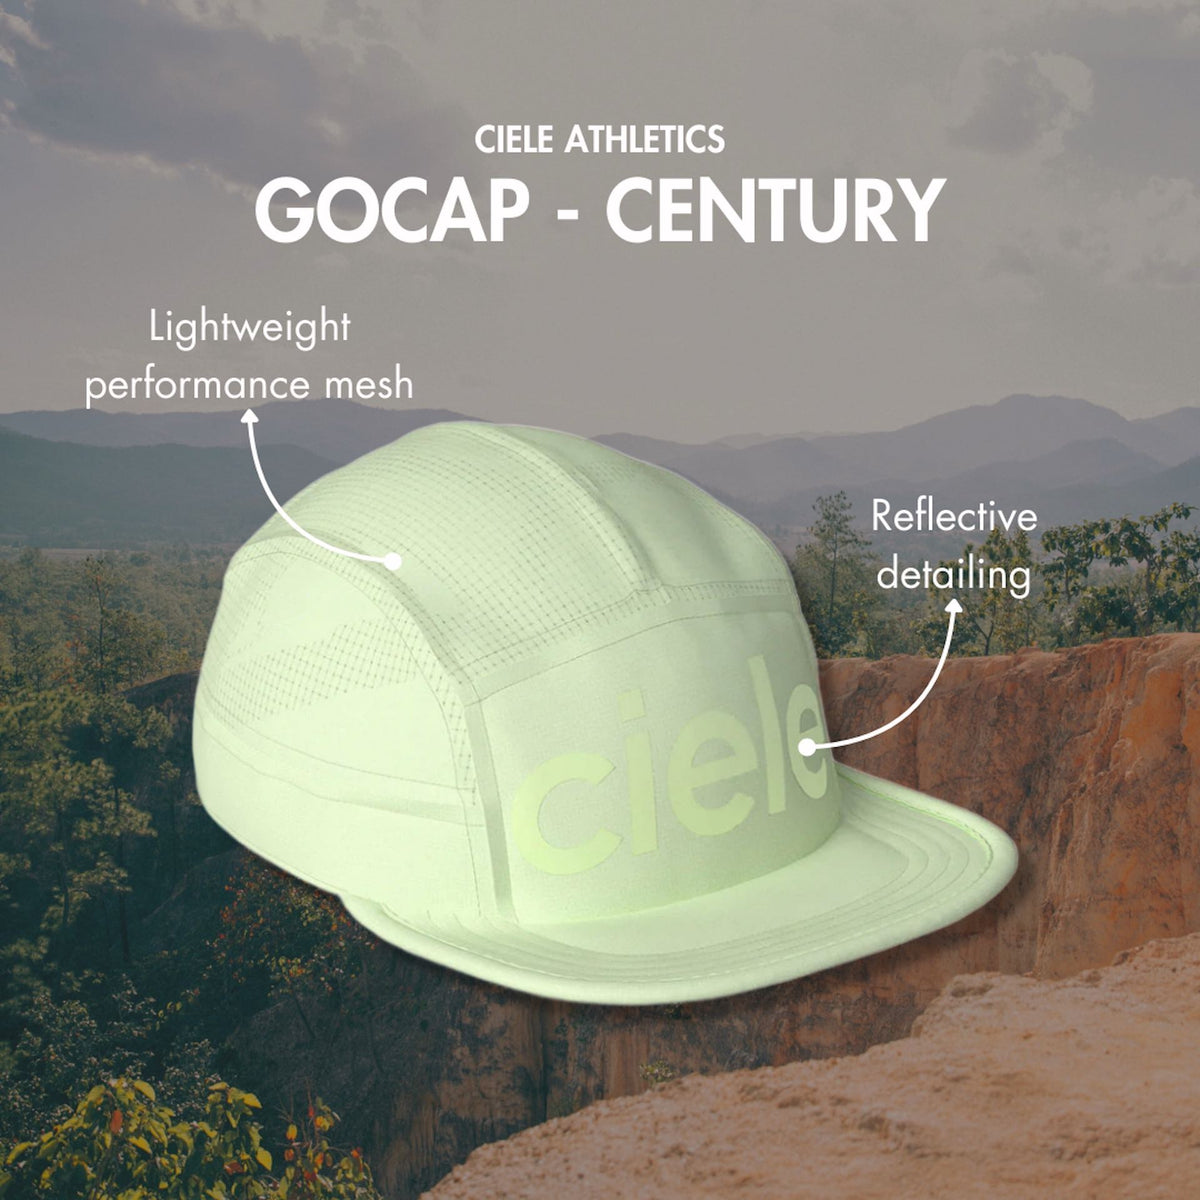 The Ciele Athletics GOCap - Century is made with a lightweight performance mesh and features reflective detailing.